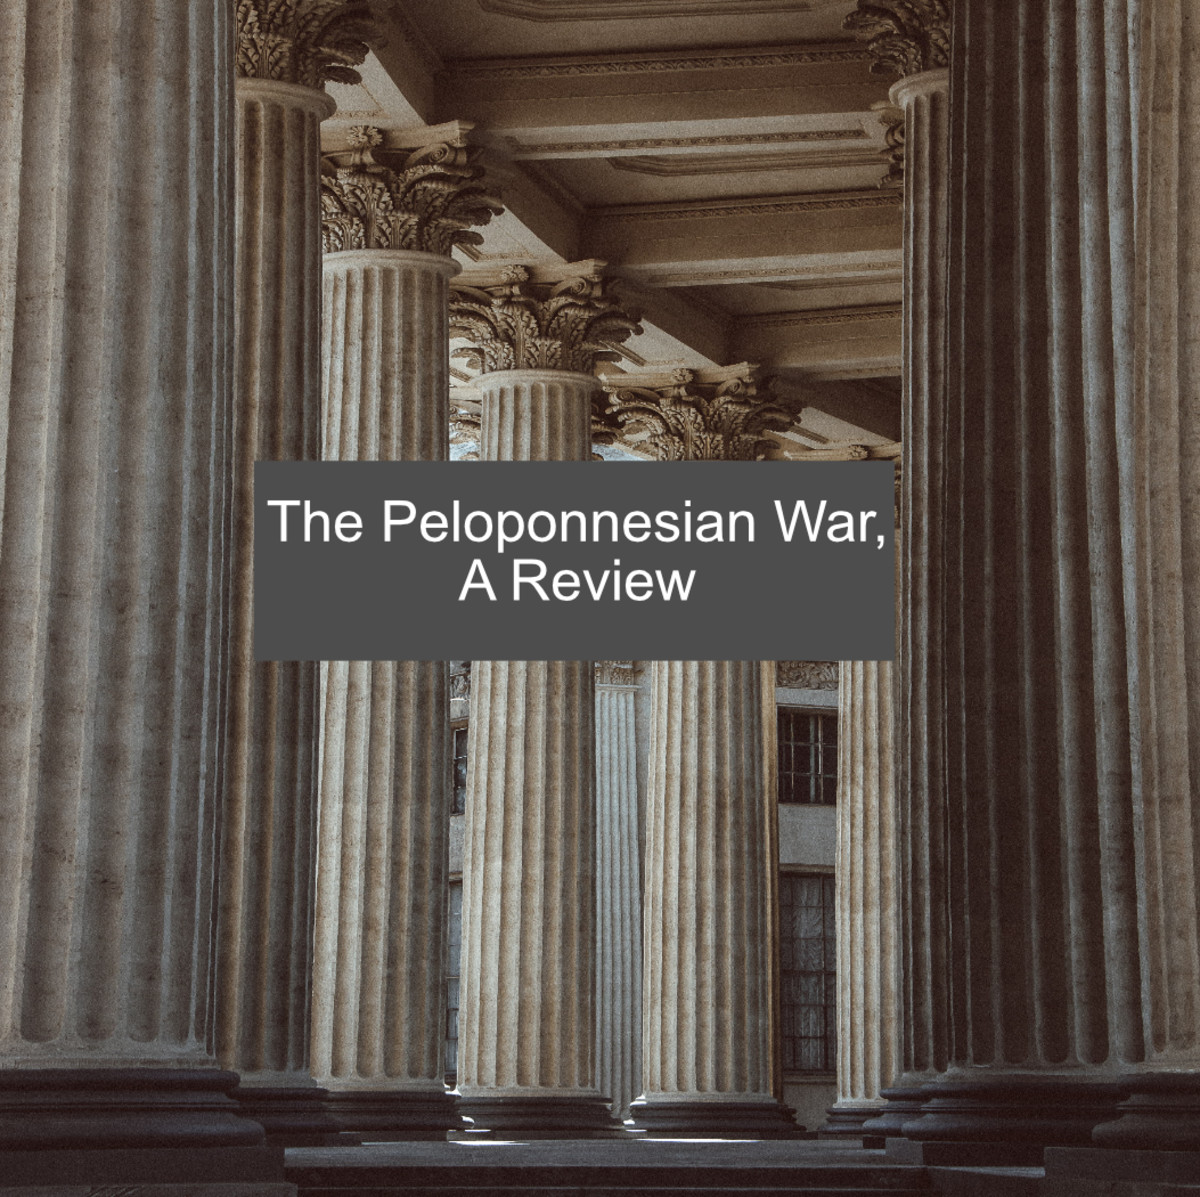 Read on for a review of The Peloponnesian War, the great war of the ancient world. 